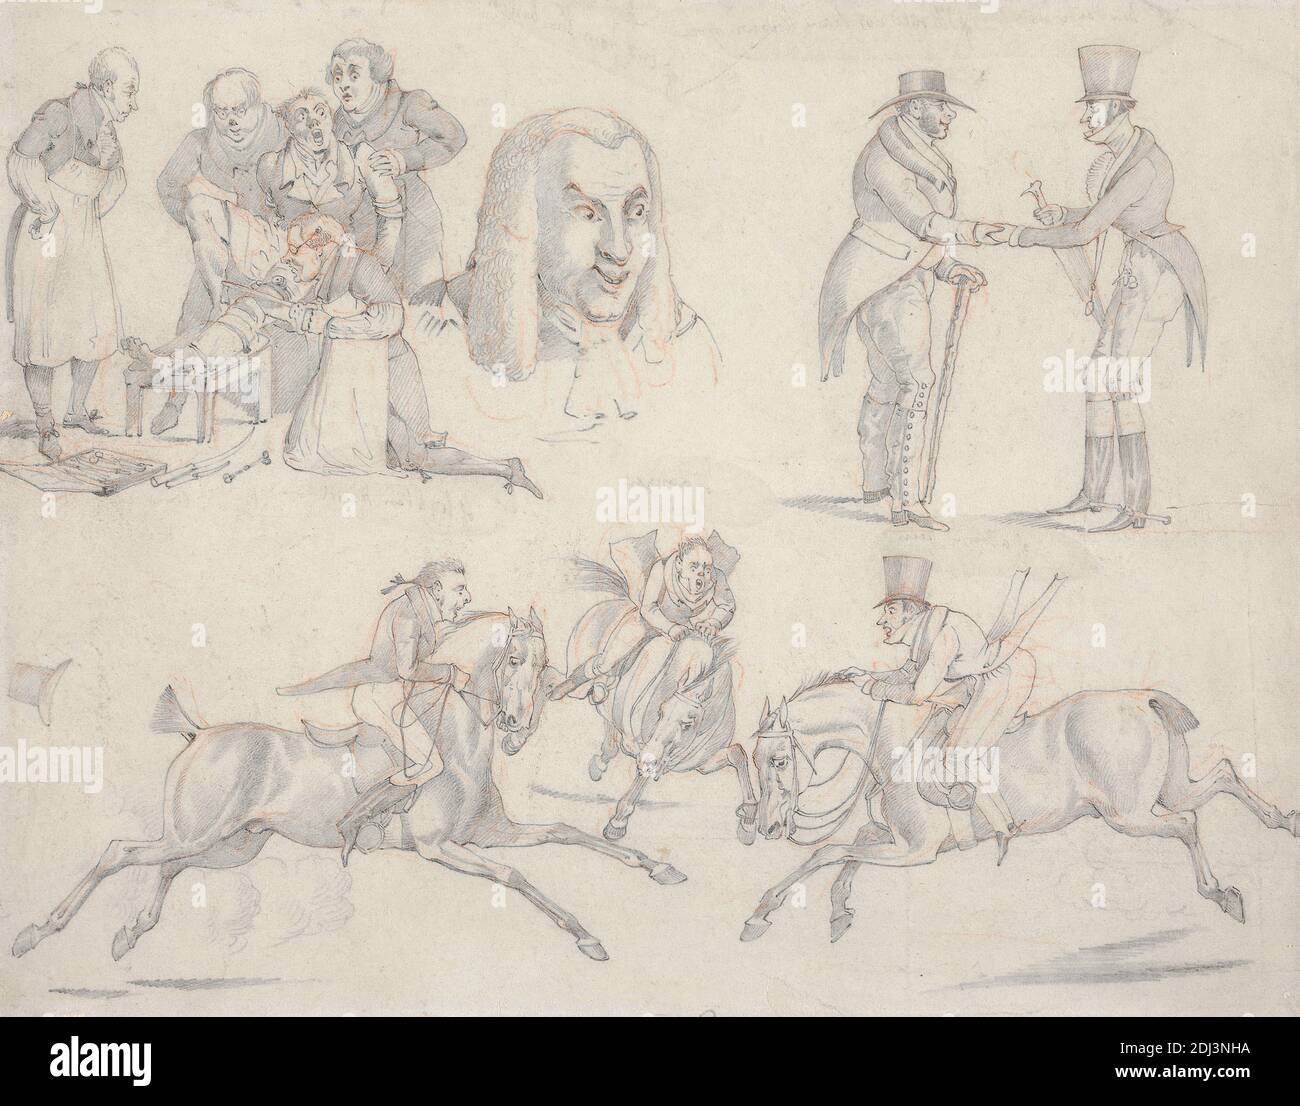 Symptoms: of How Do You Do, of I Should Not Have Known You, of My Lud, Of Easing a Patient, of a Loose Rein, of Wokey, of Tight in Hand, Henry Thomas Alken, 1785–1851, British, between 1818 and 1822, Graphite and red chalk on medium, slightly textured, blued white, wove paper, Sheet: 6 3/4 × 8 5/8 inches (17.1 × 21.9 cm), cane, crash, galloping, genre subject, hats, horseback riders, horseback riding, horses (animals), meeting, men, patient, portrait, saw, sporting art, surgeon, surgery Stock Photo